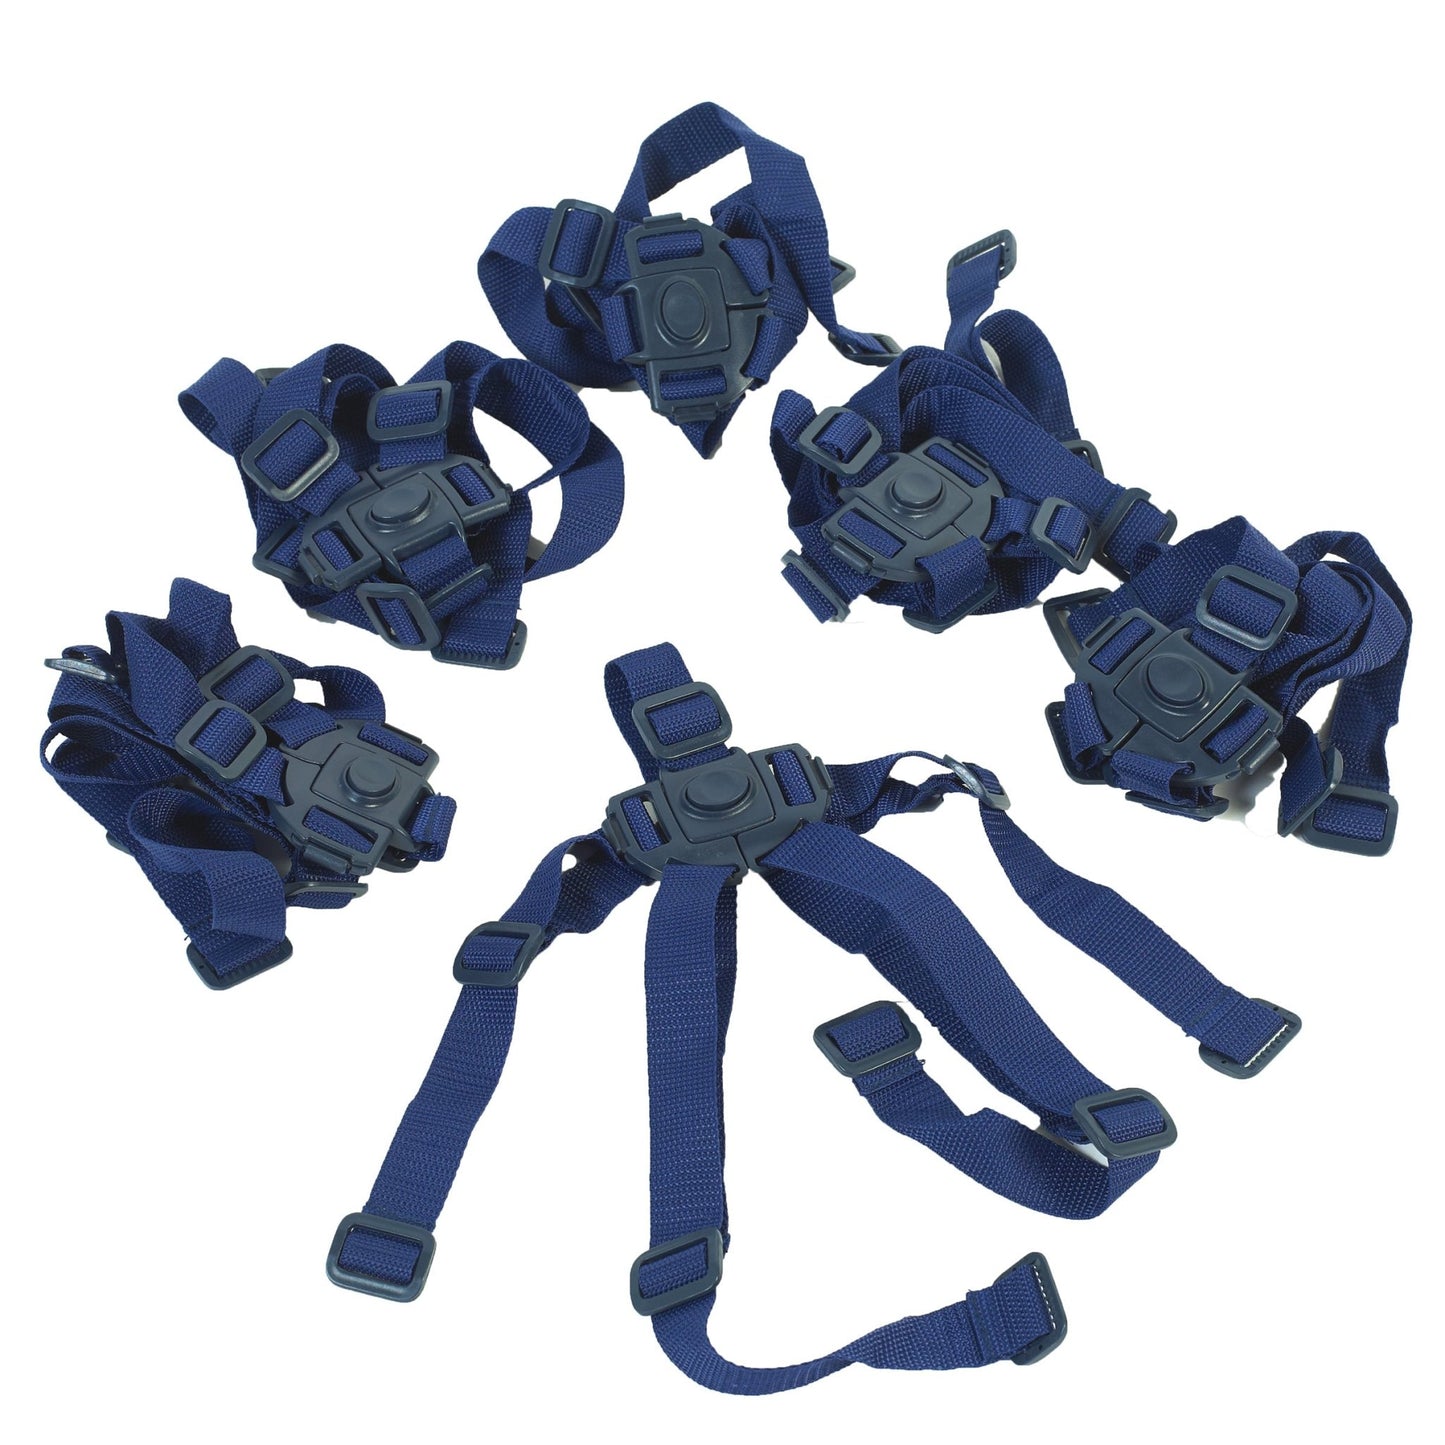 Angeles Stroller Seat Harness Set of 6 (AFB6365) - SchoolOutlet